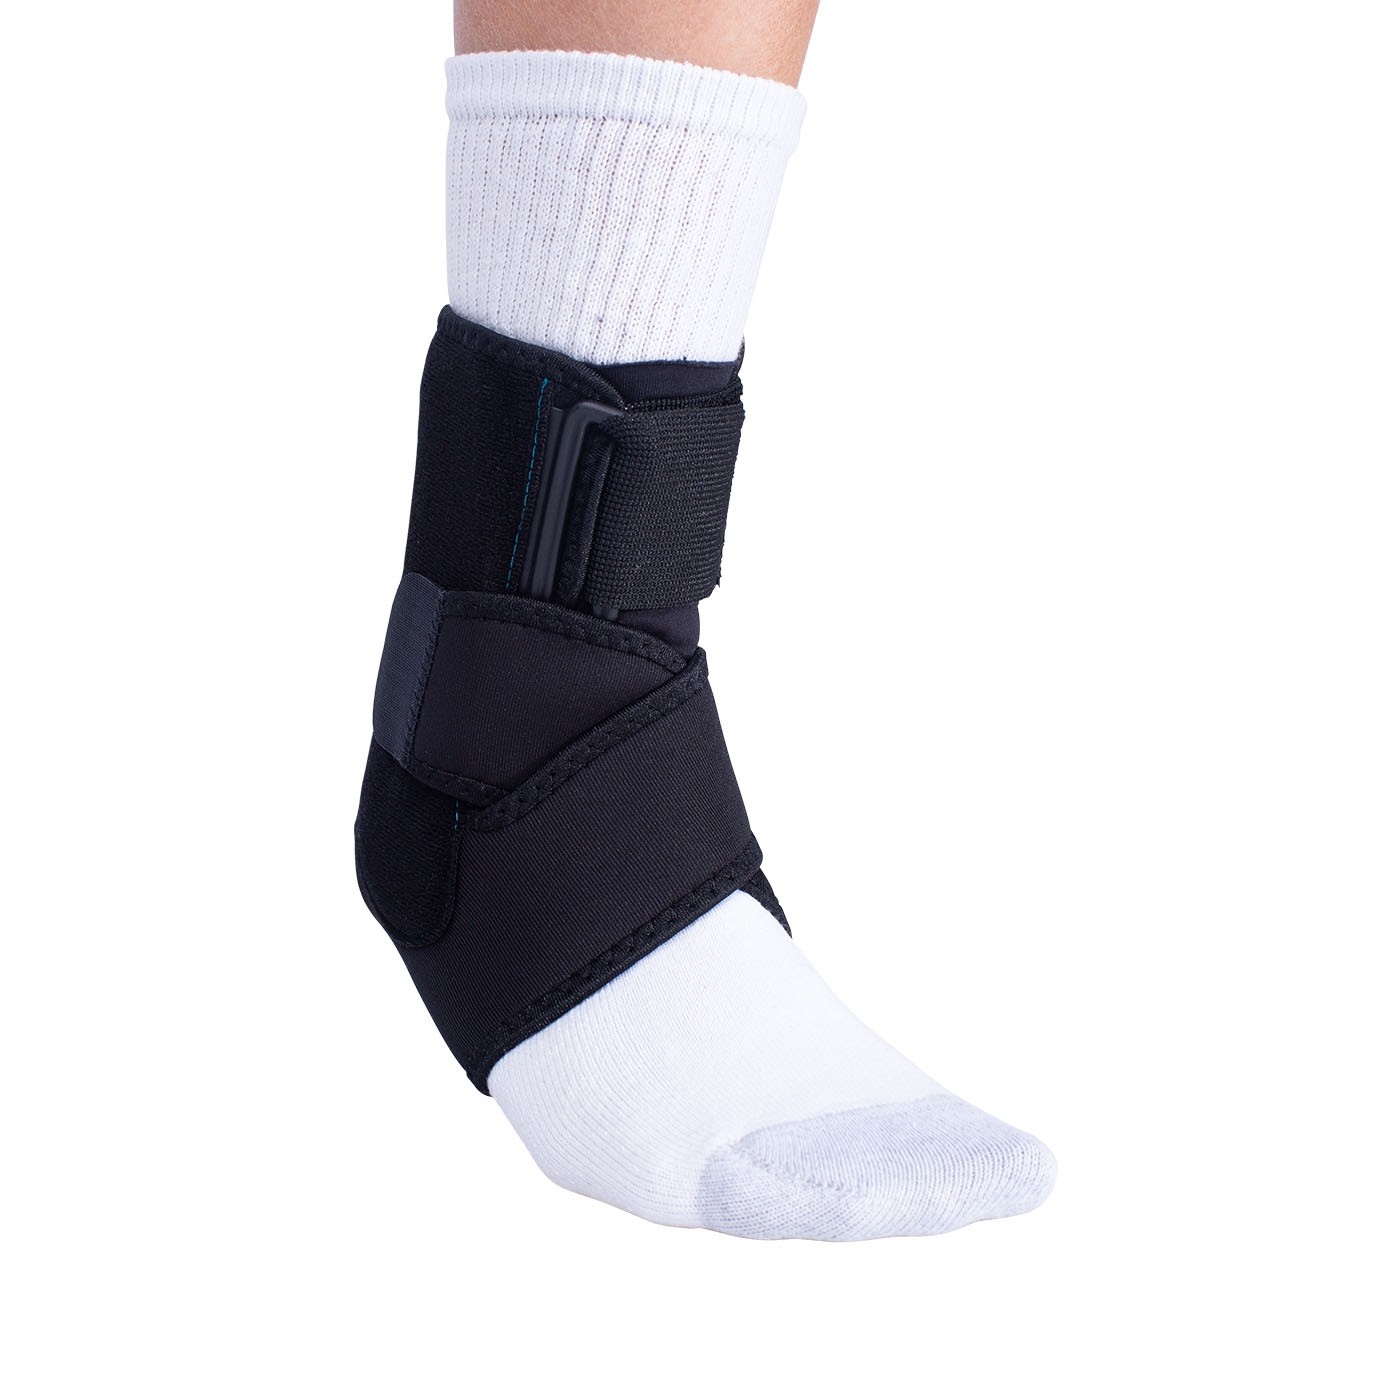 Leezo Ankle Braces Support Safety Adjustable Comfortable Compression Ankle Protectors Supports Guard Foot Orthosis Stabilizer 